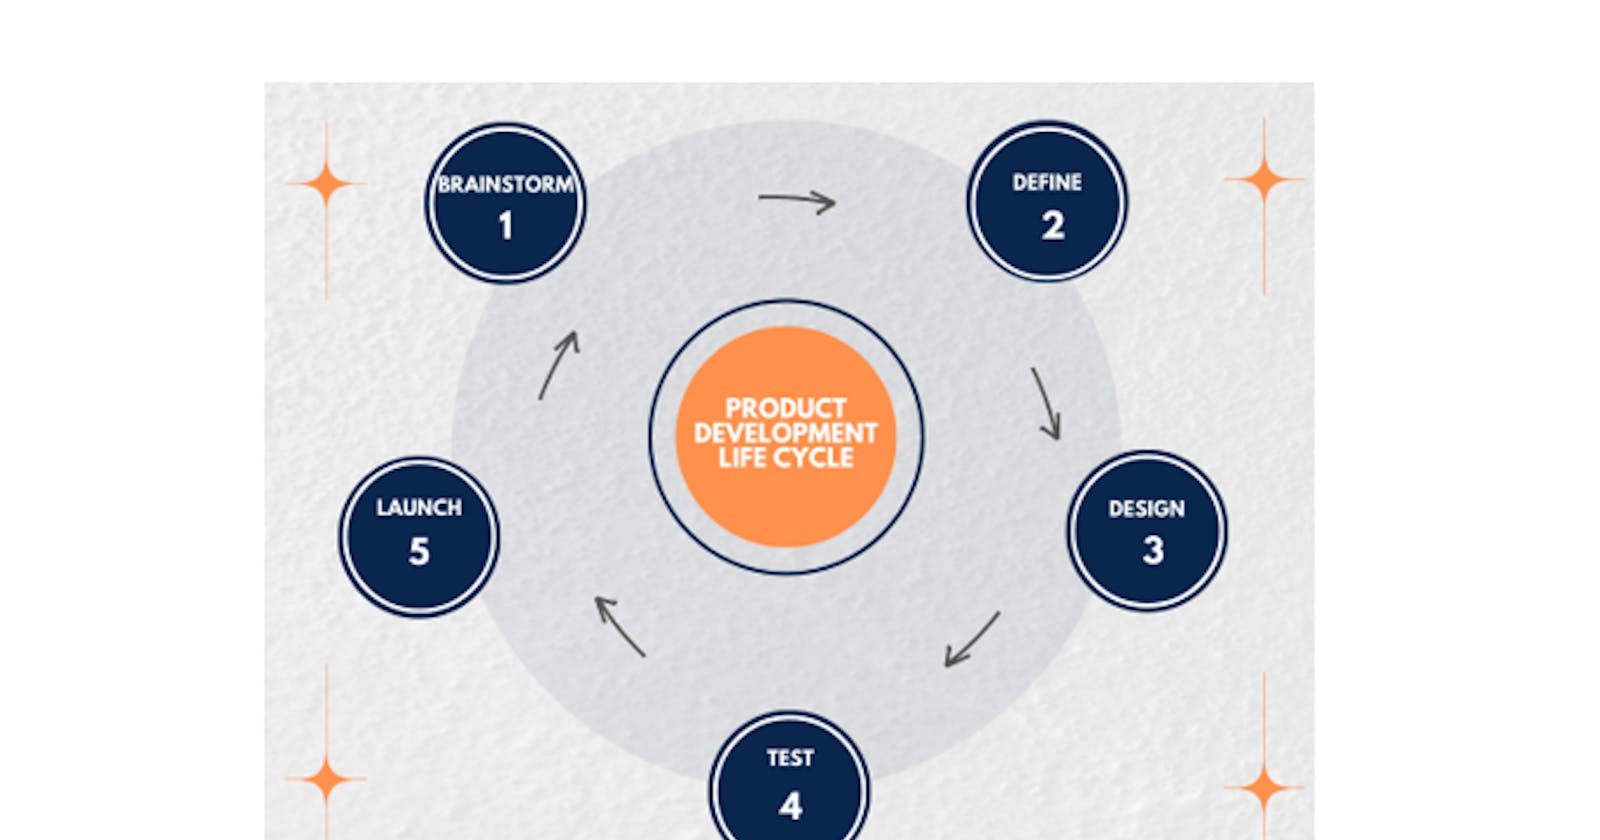 Product Development Life Cycle: 5 Stages from Ideation to Final Product